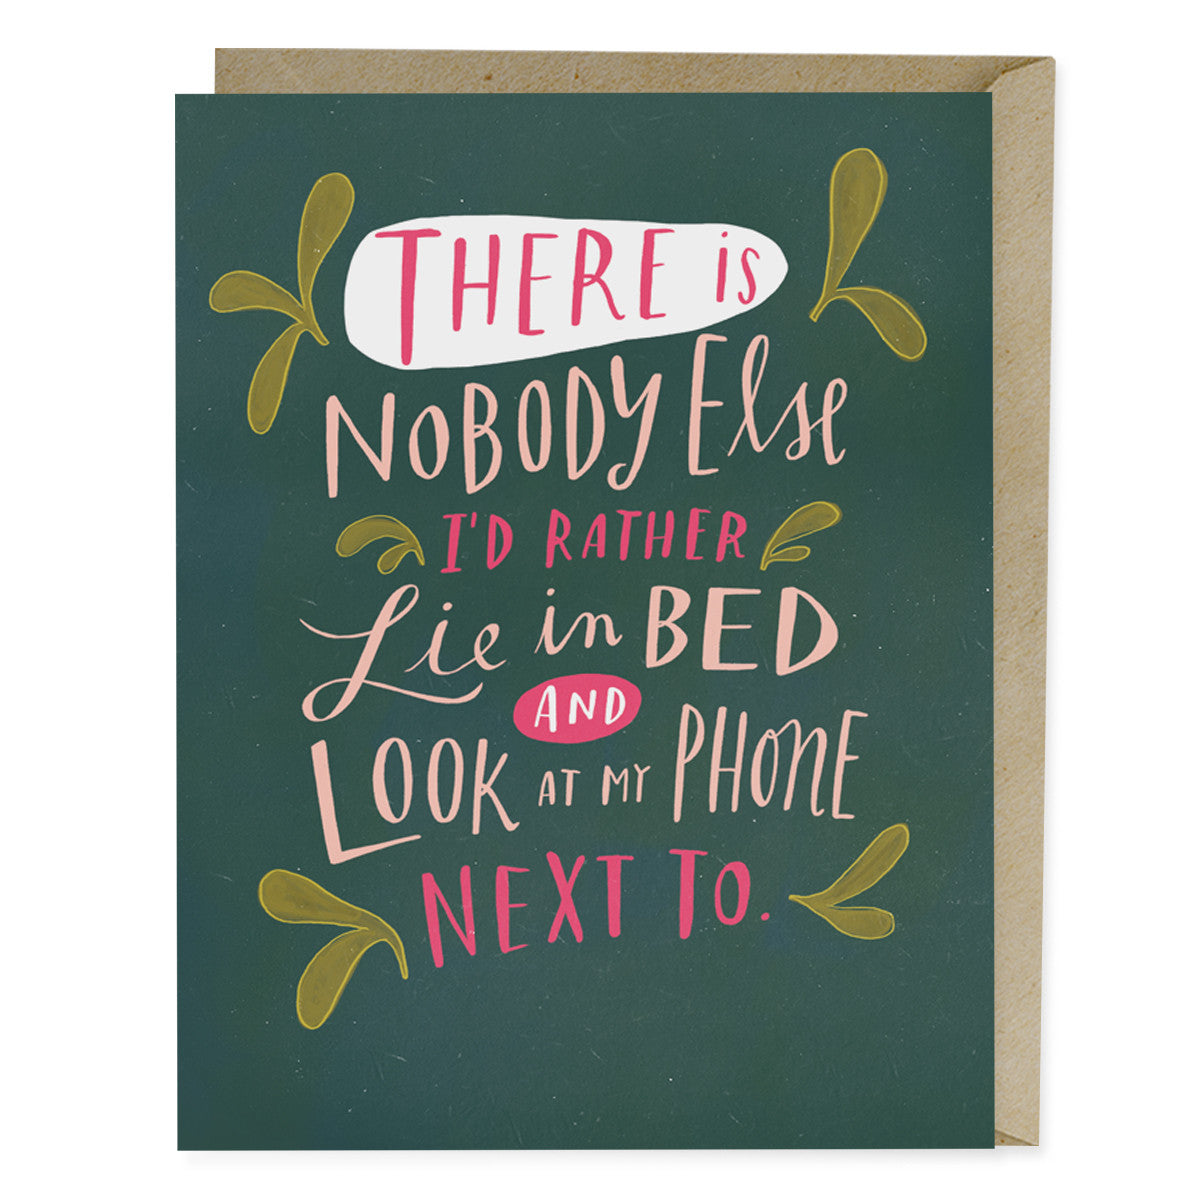 Card - There is Nobody Else I'd Rather Lie in Bed and Look at my Phone Next to